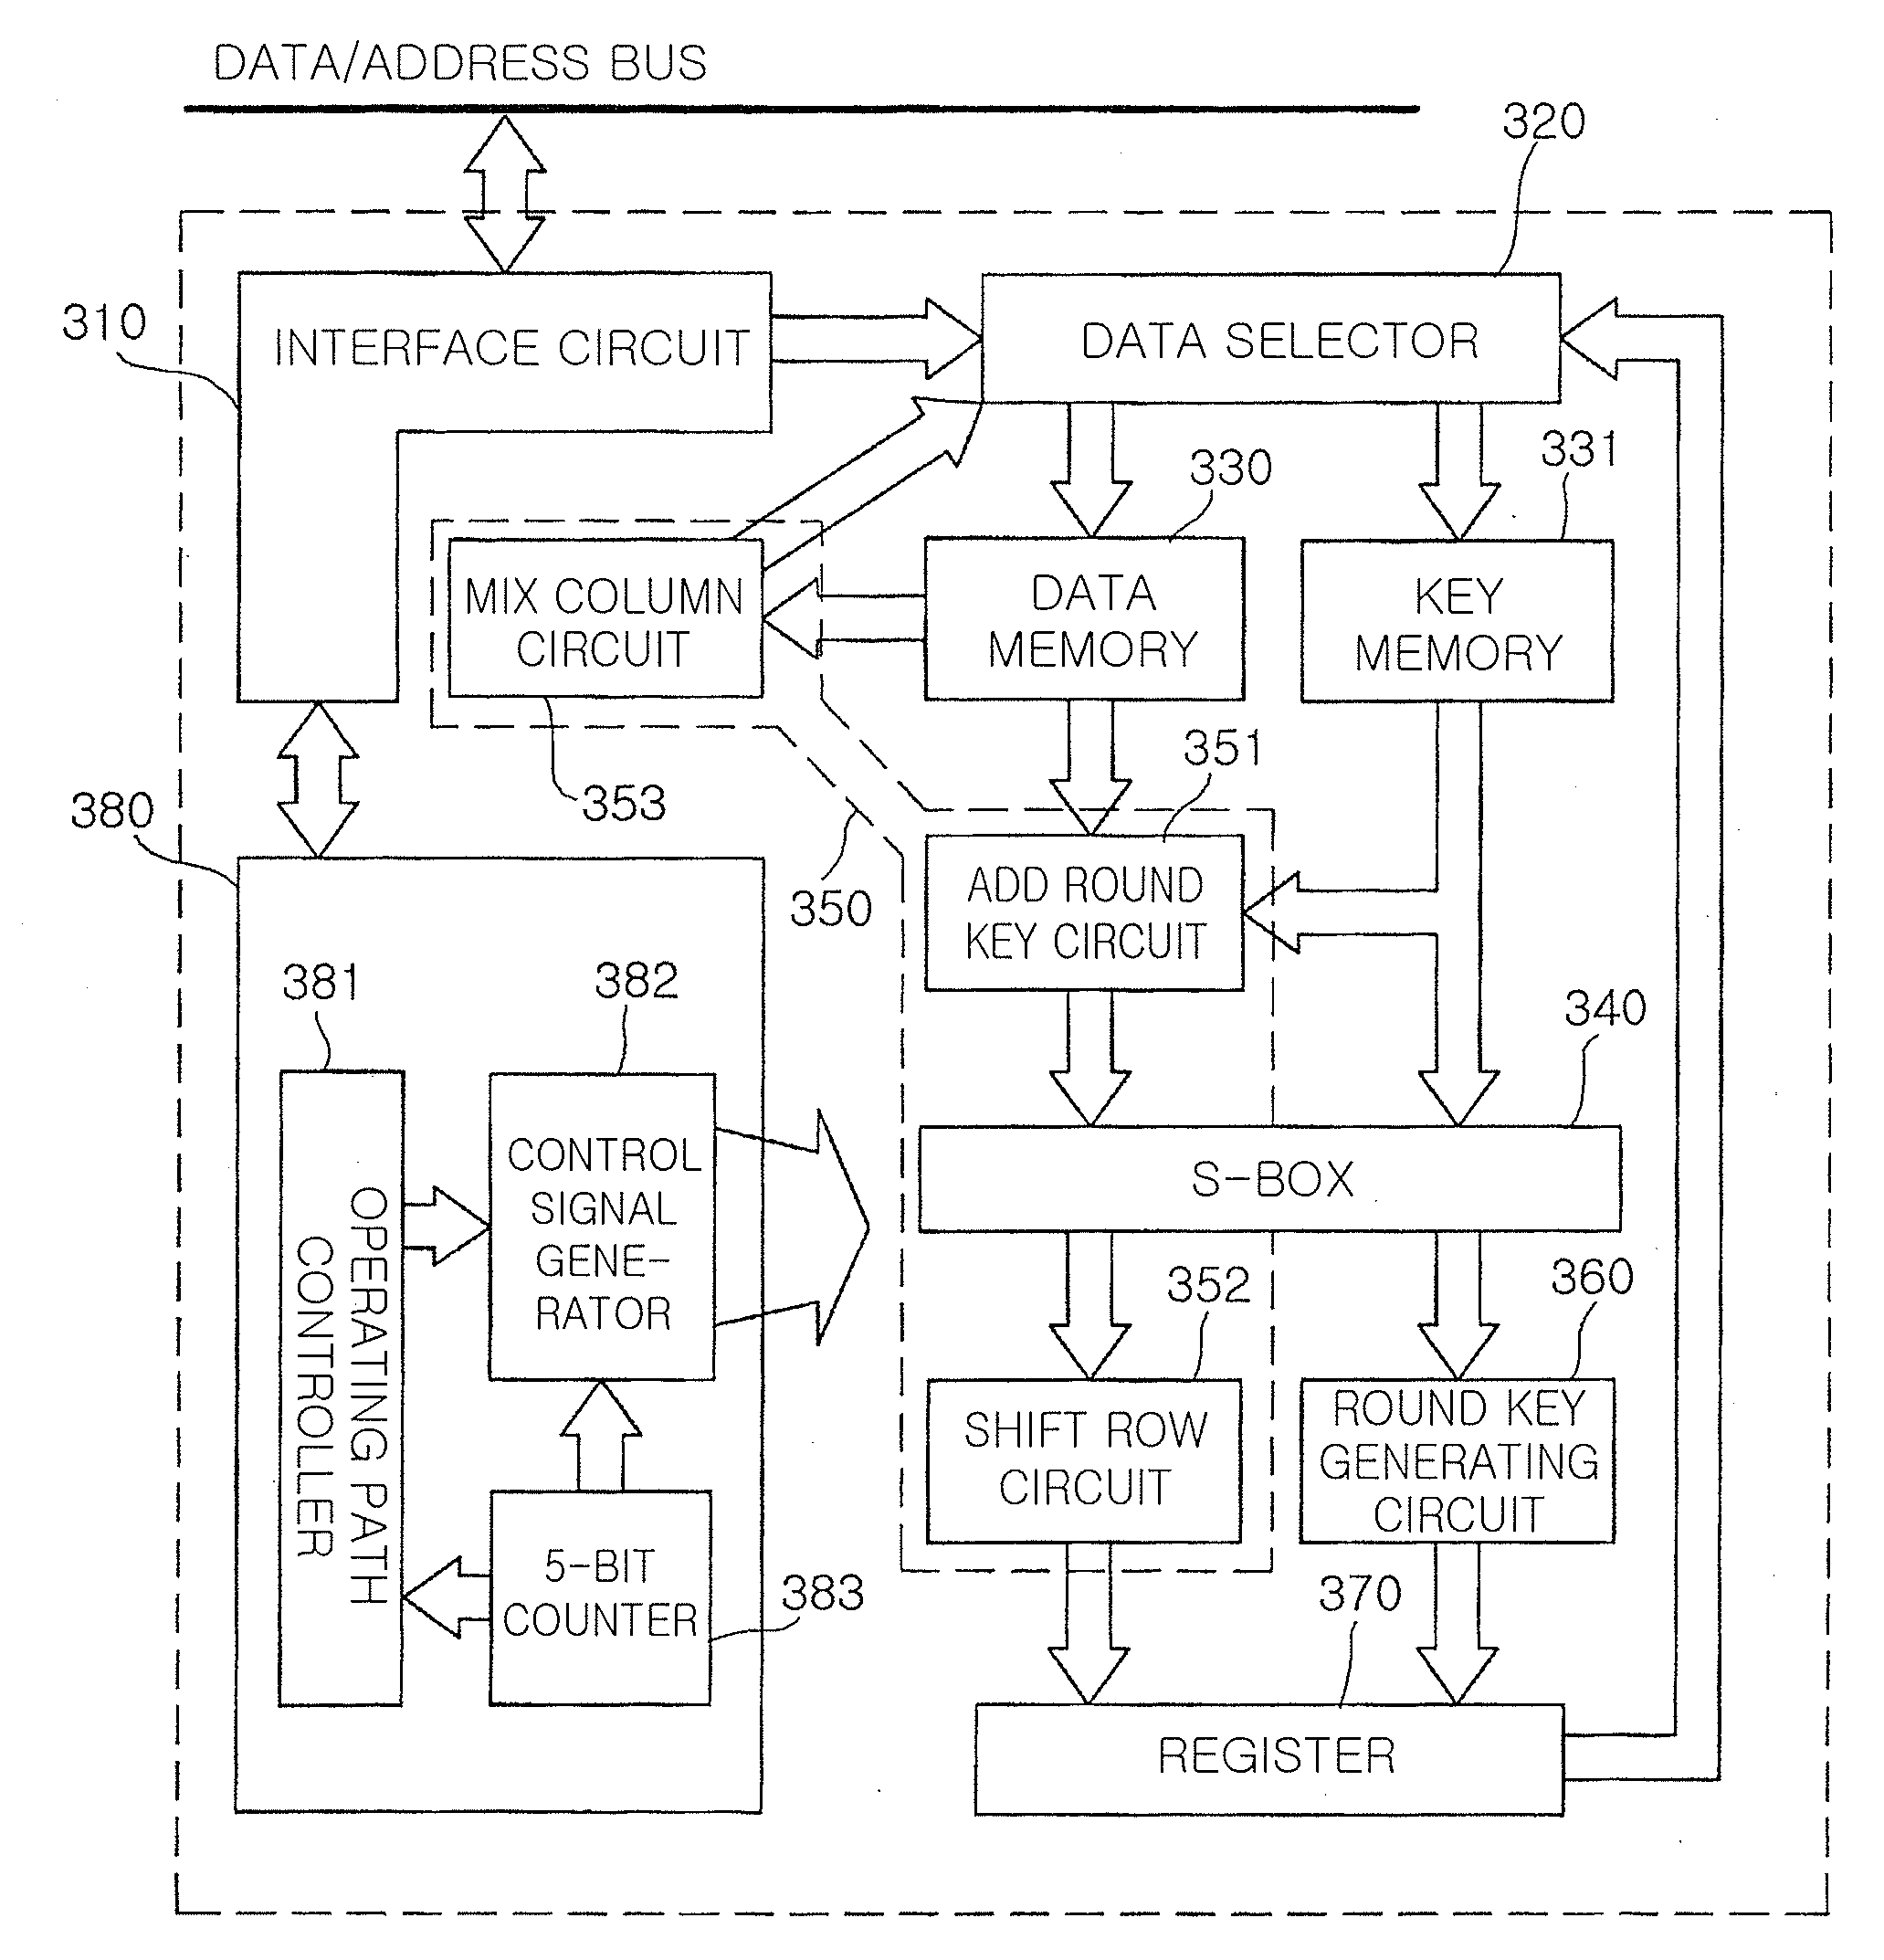 Apparatus and method for low power AES cryptographic circuit for embedded system